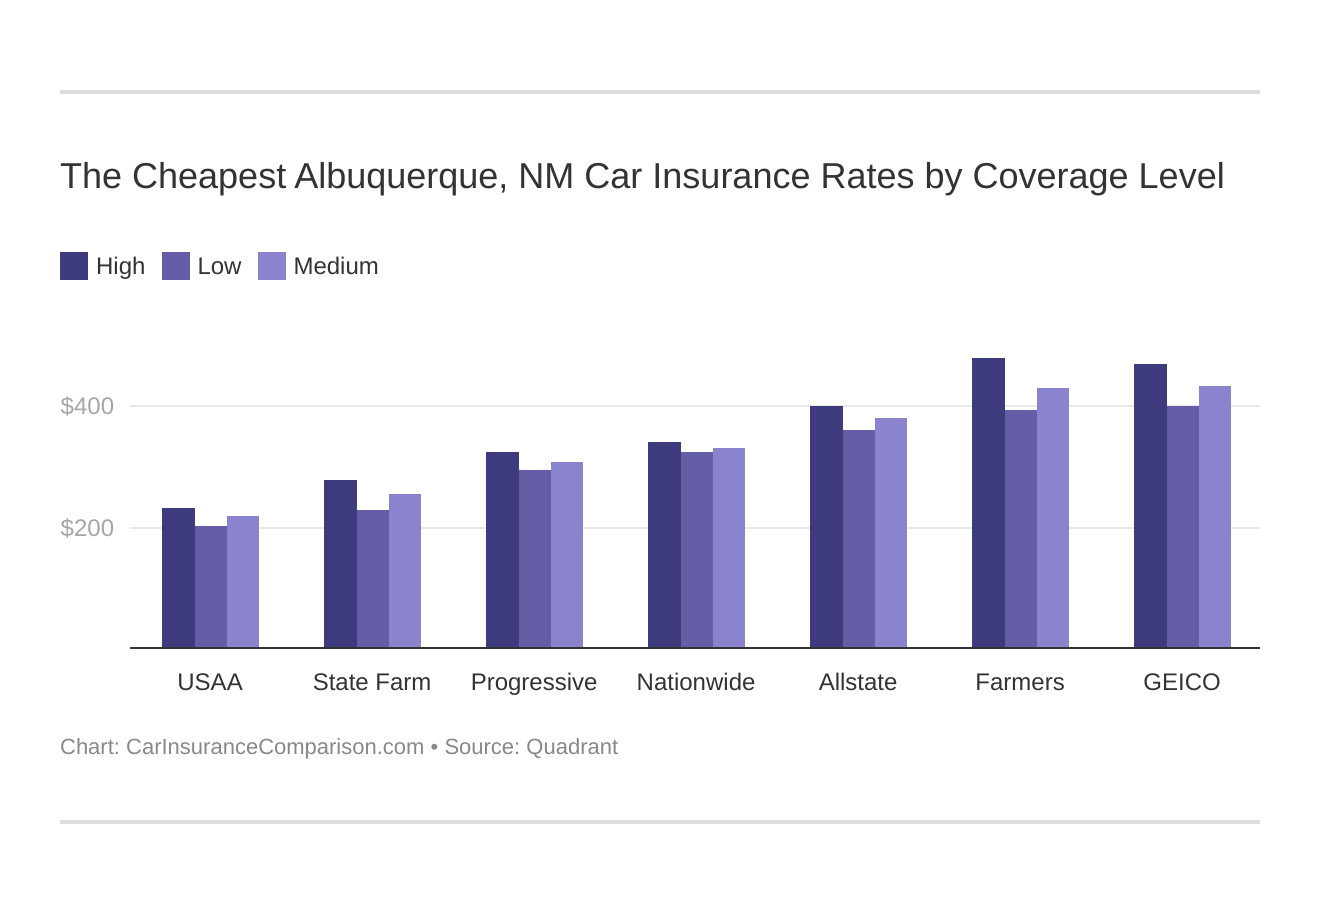 The Cheapest Albuquerque, NM Car Insurance Rates by Coverage Level